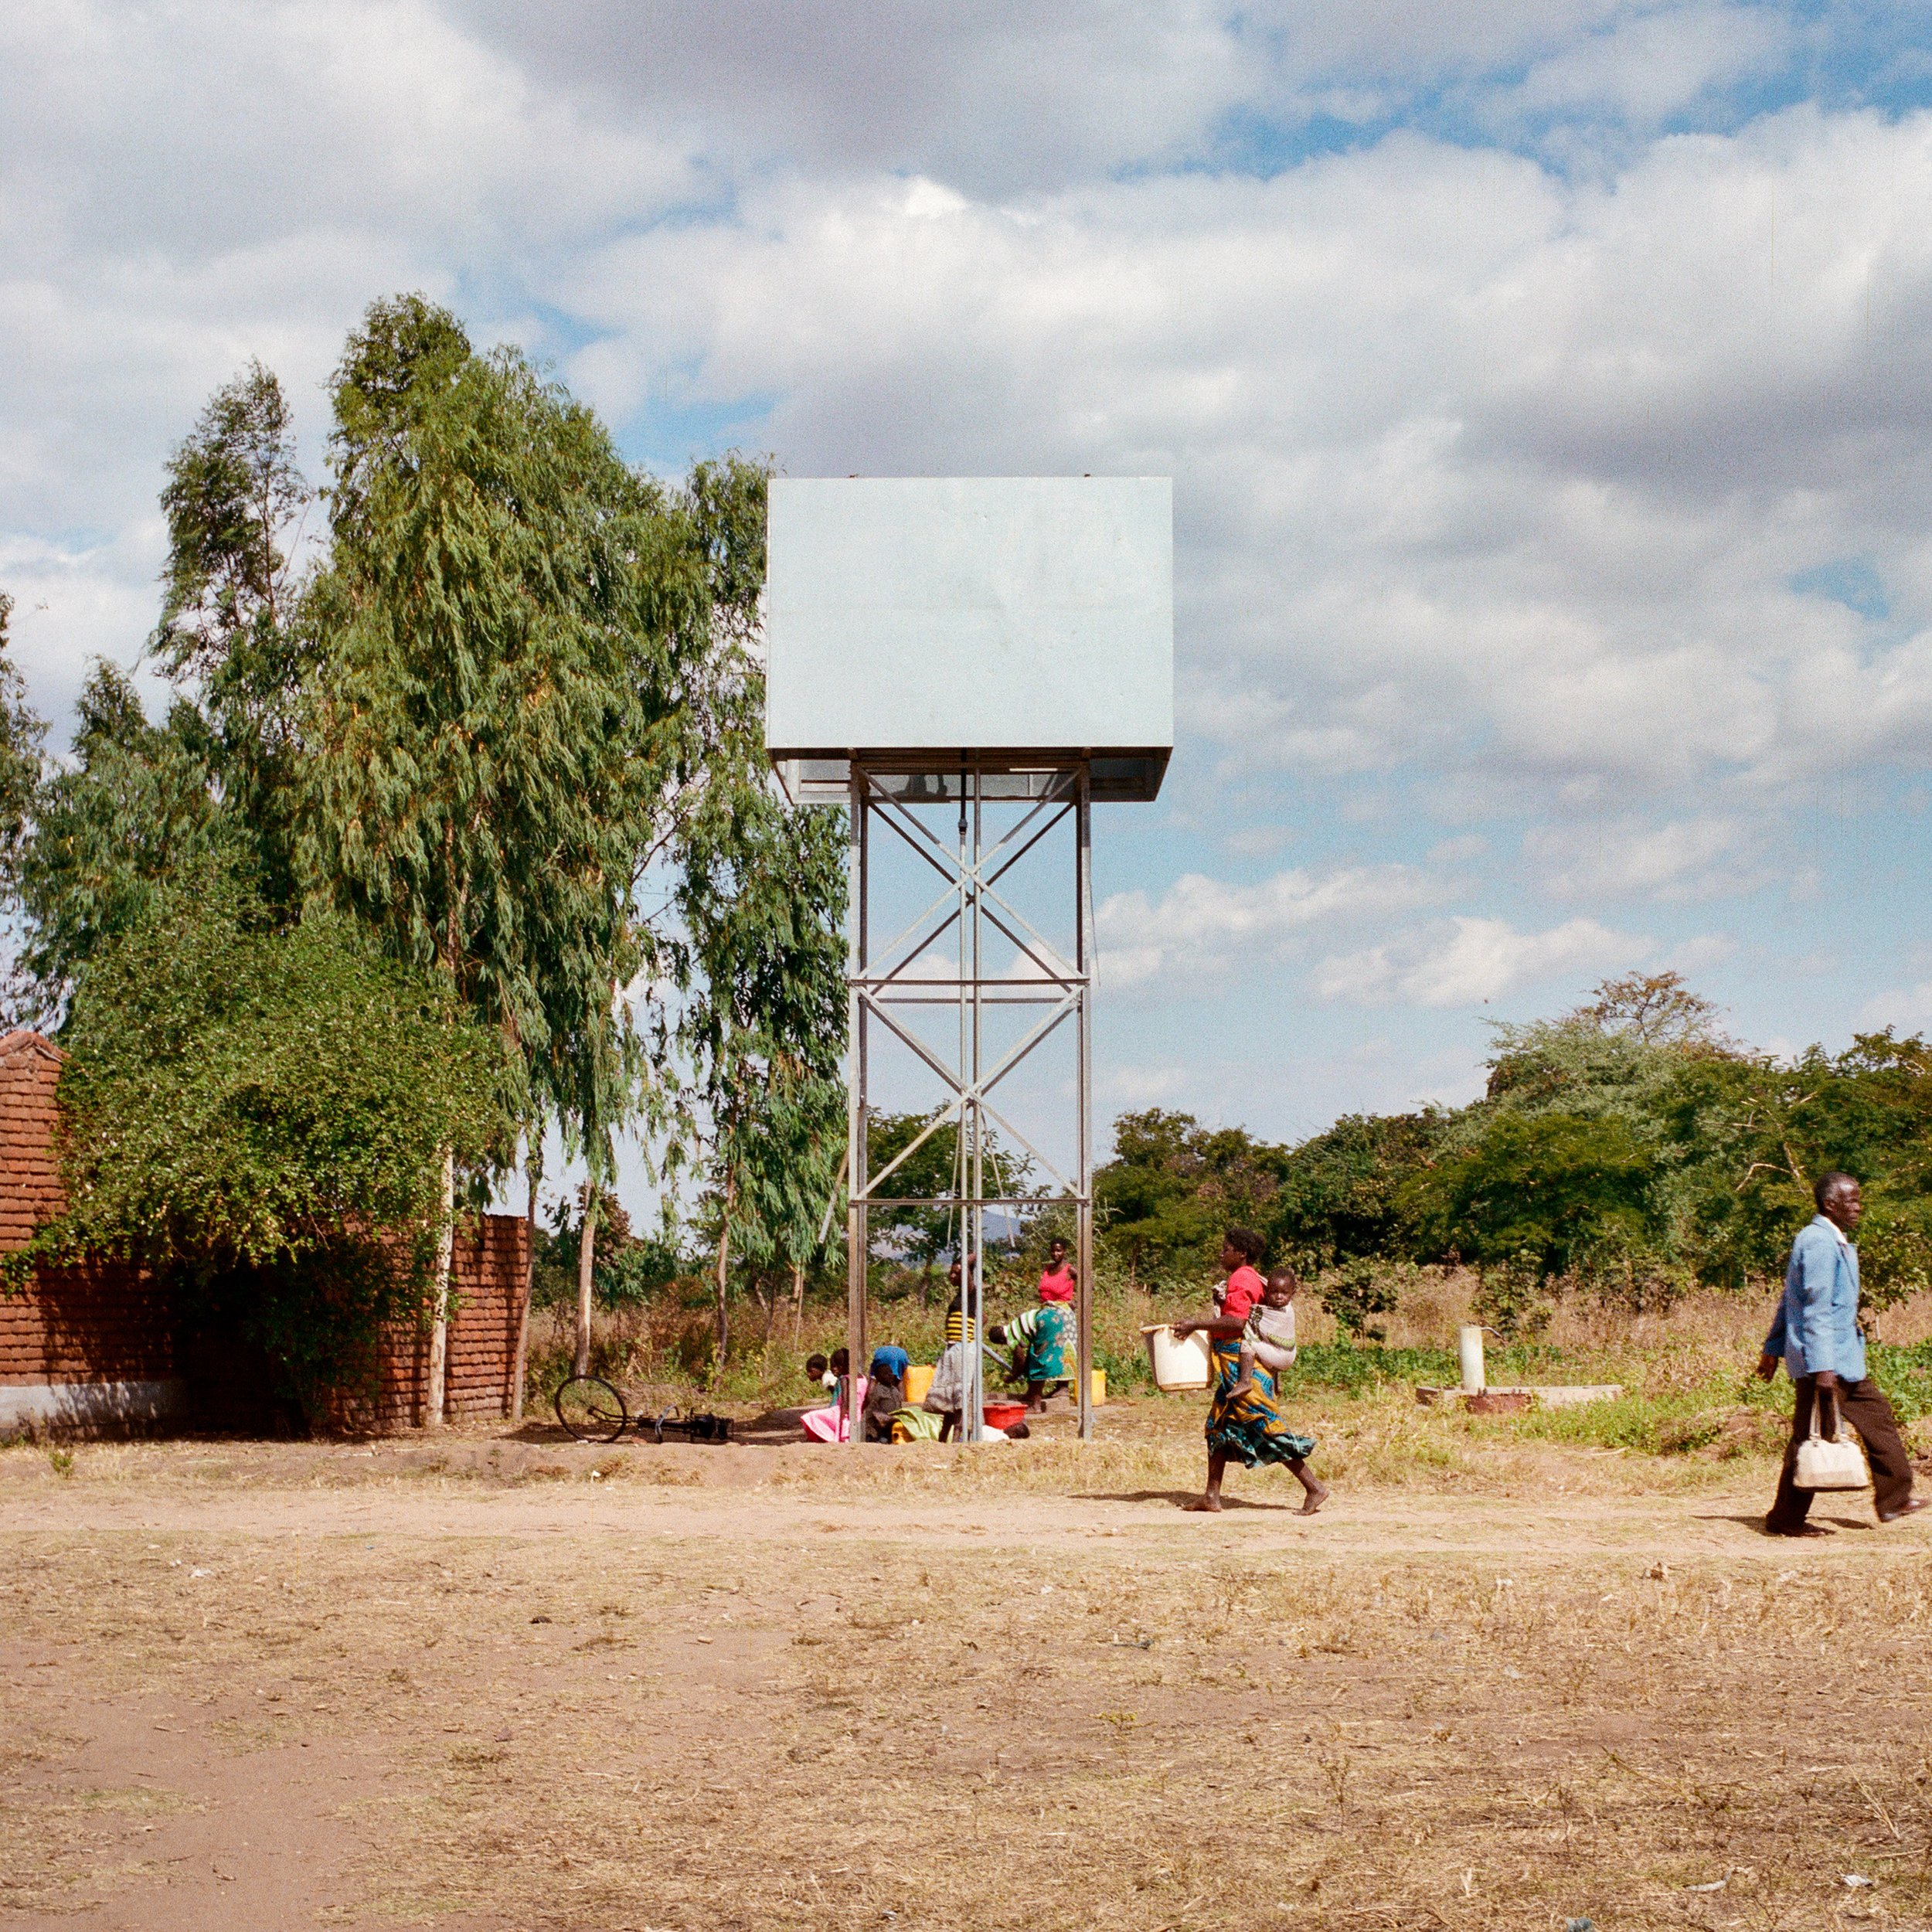  Empty, unused water tower from the site of a broken PlayPump. Malopa Primary School in Mora, Balaka District, Malawi. Photographed June 13, 2015. The people getting water underneath the tower are using a handpump that does not require use of the tow